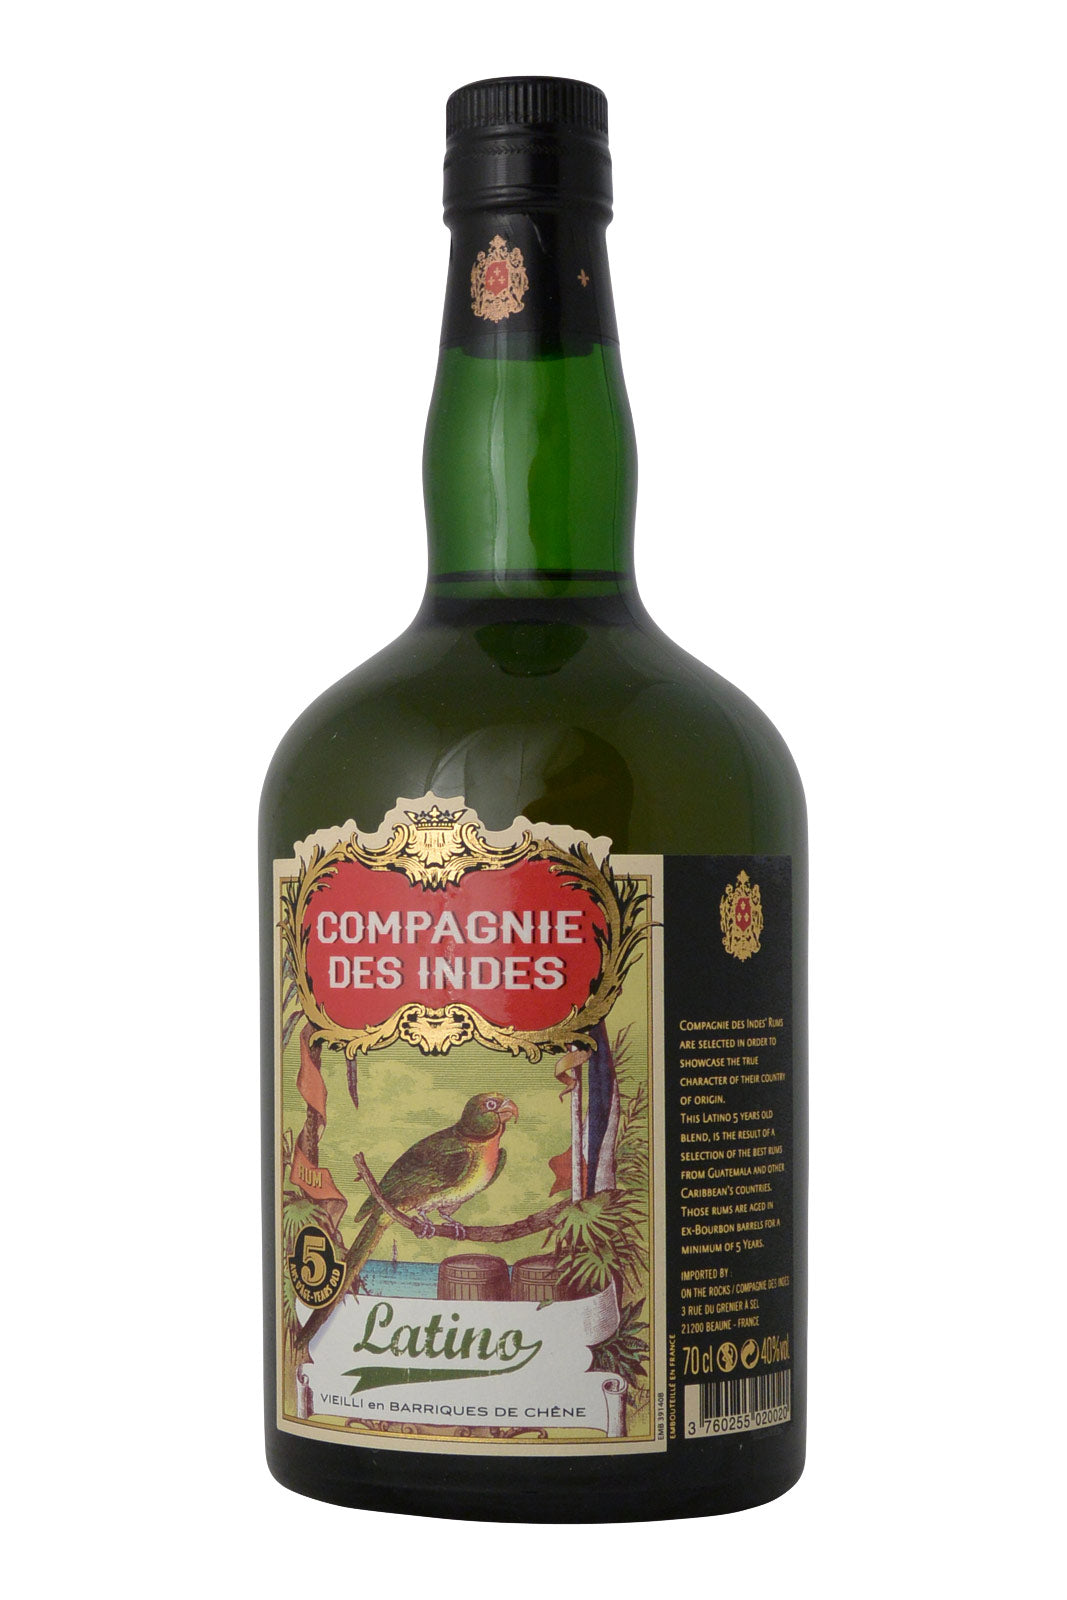 Indes Latino Compagnie Old Year des 5 Blend